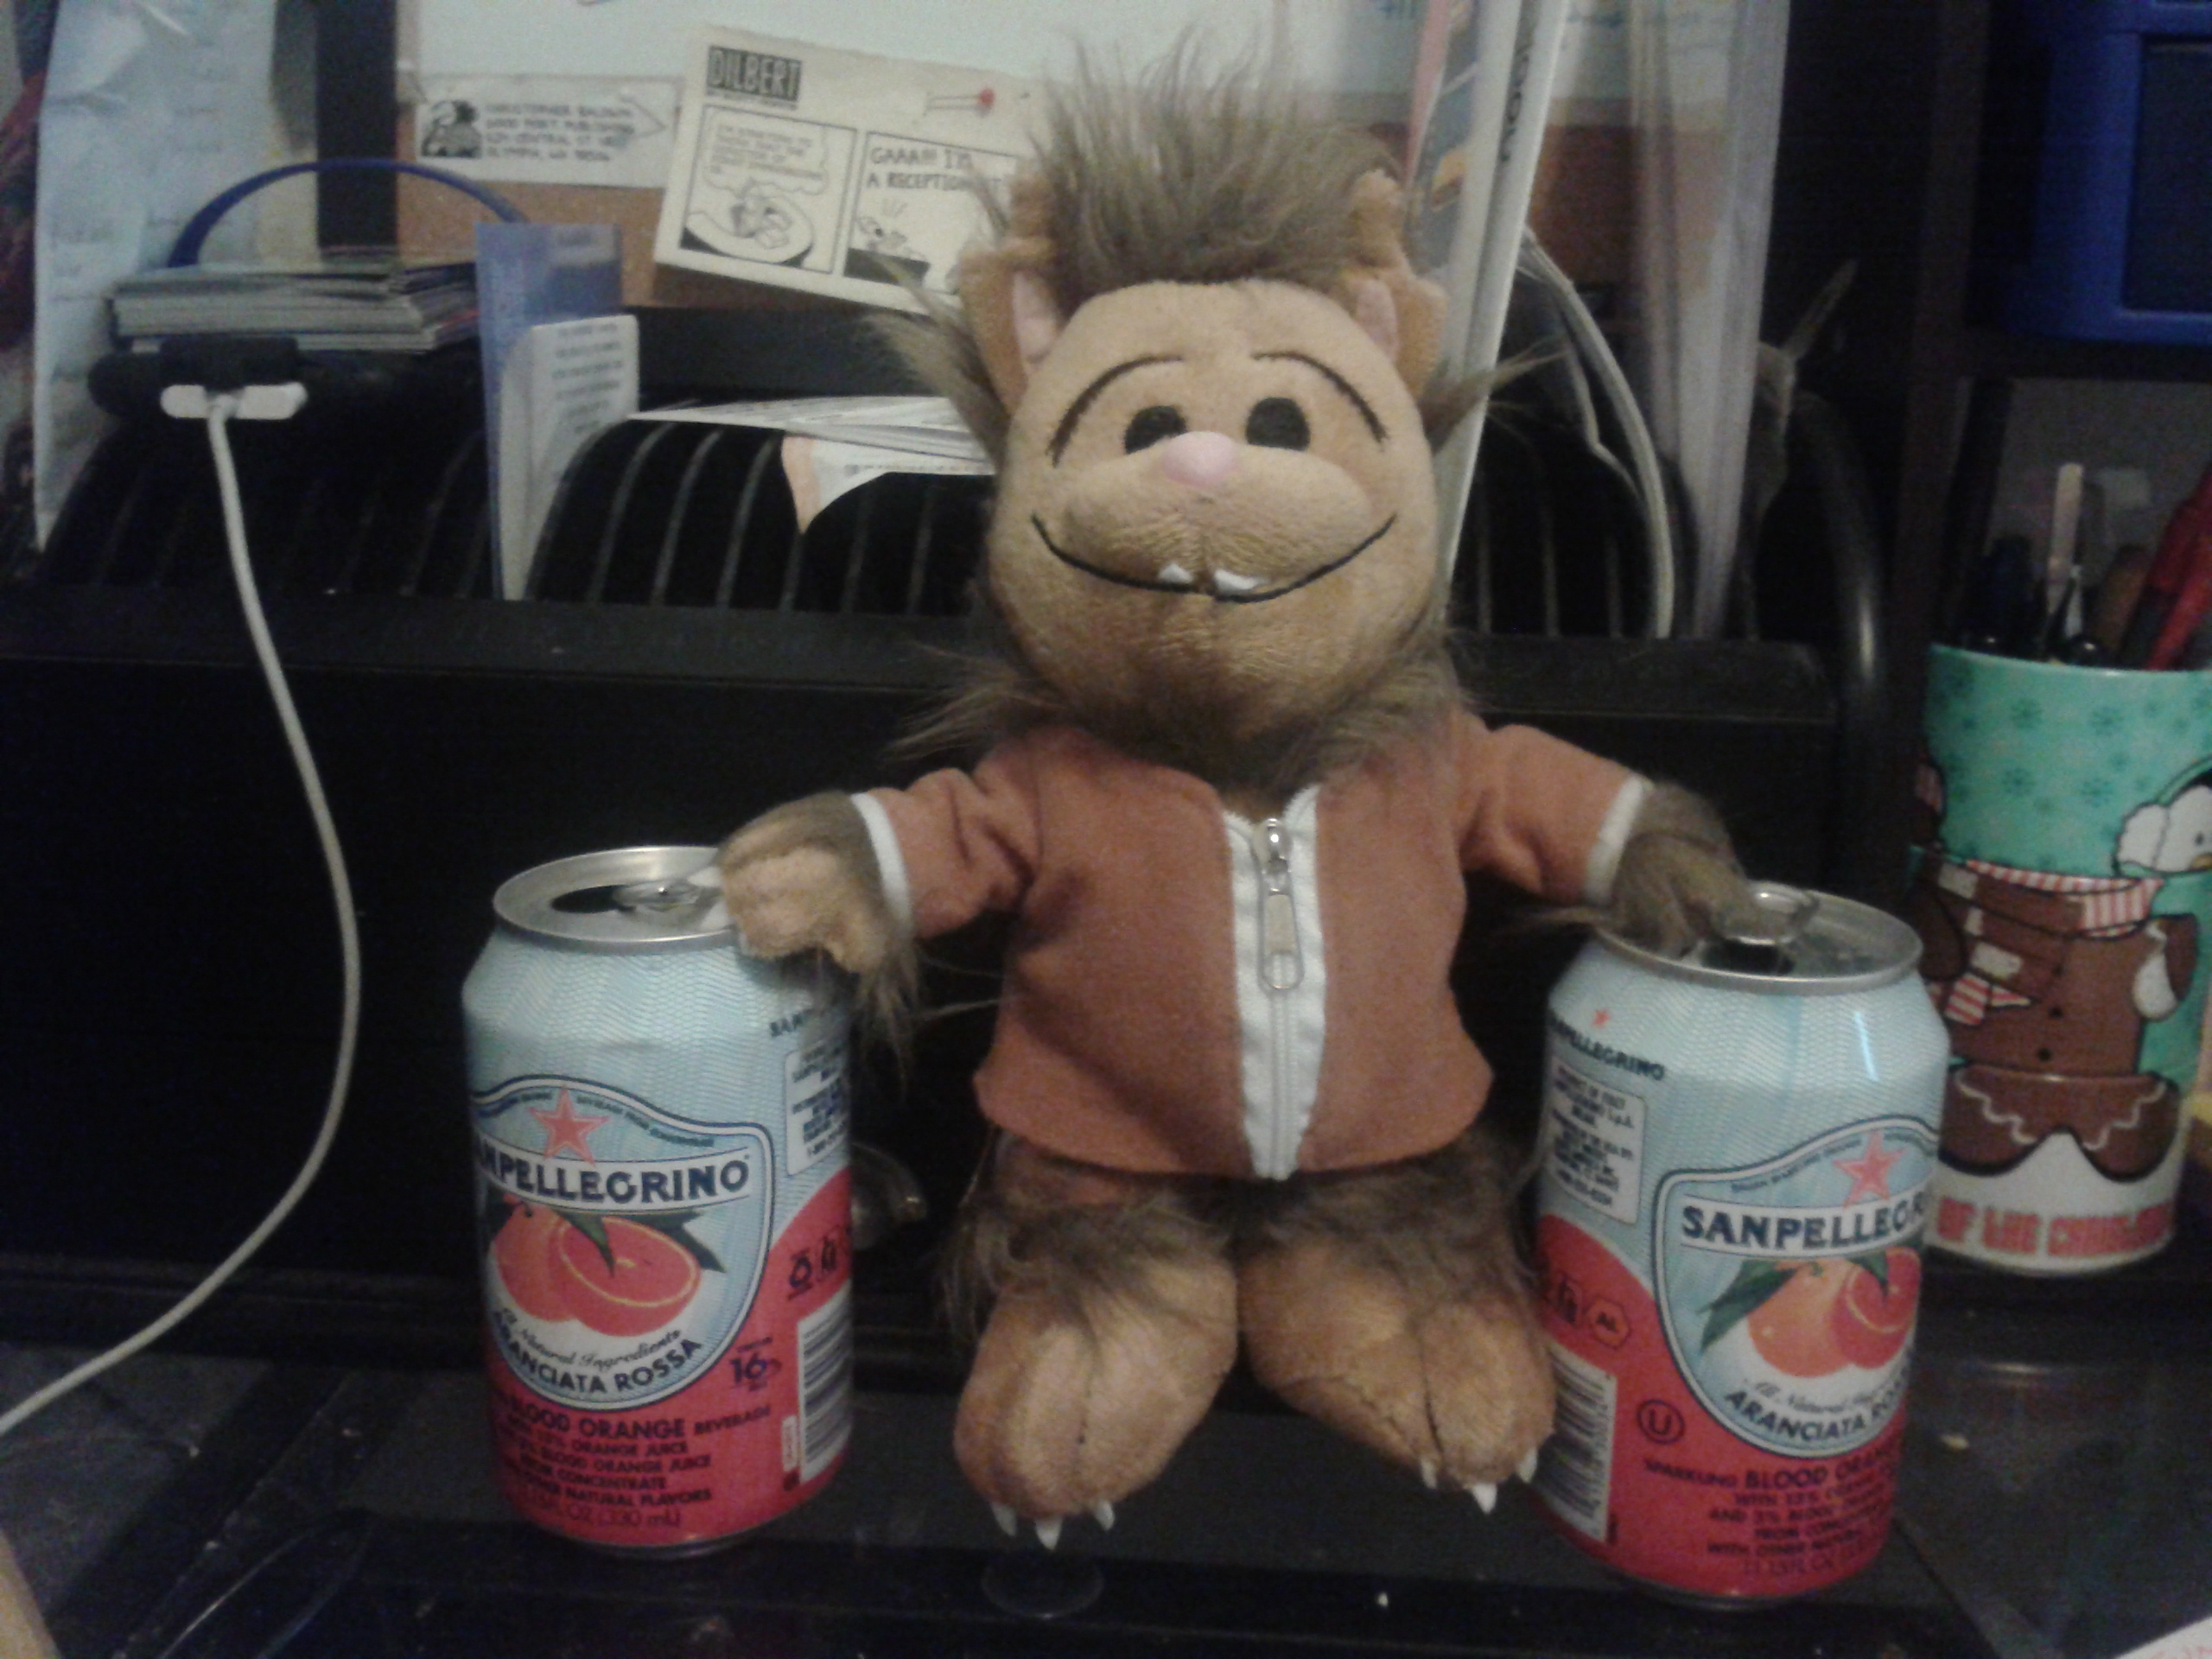 Photo by Laura Darkstar of a Wolfie plush toy posing with two cans of blood orange-flavored sparkling water